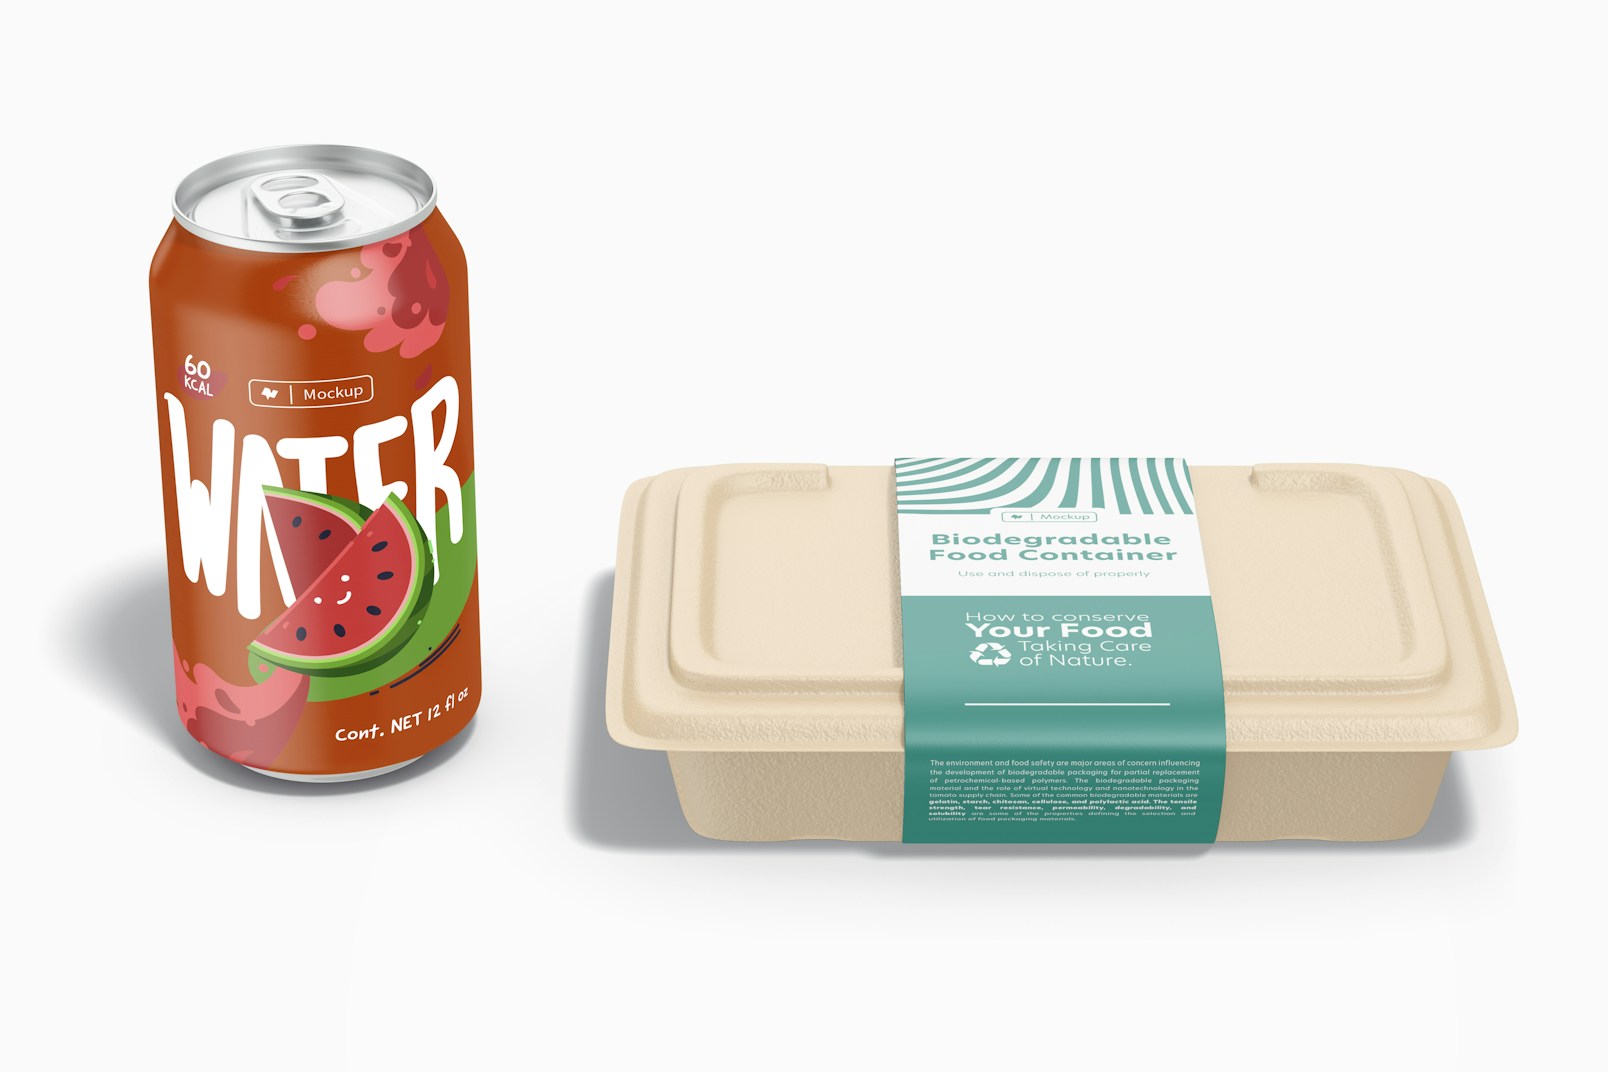 Biodegradable Food Containers with Soda Can Mockup